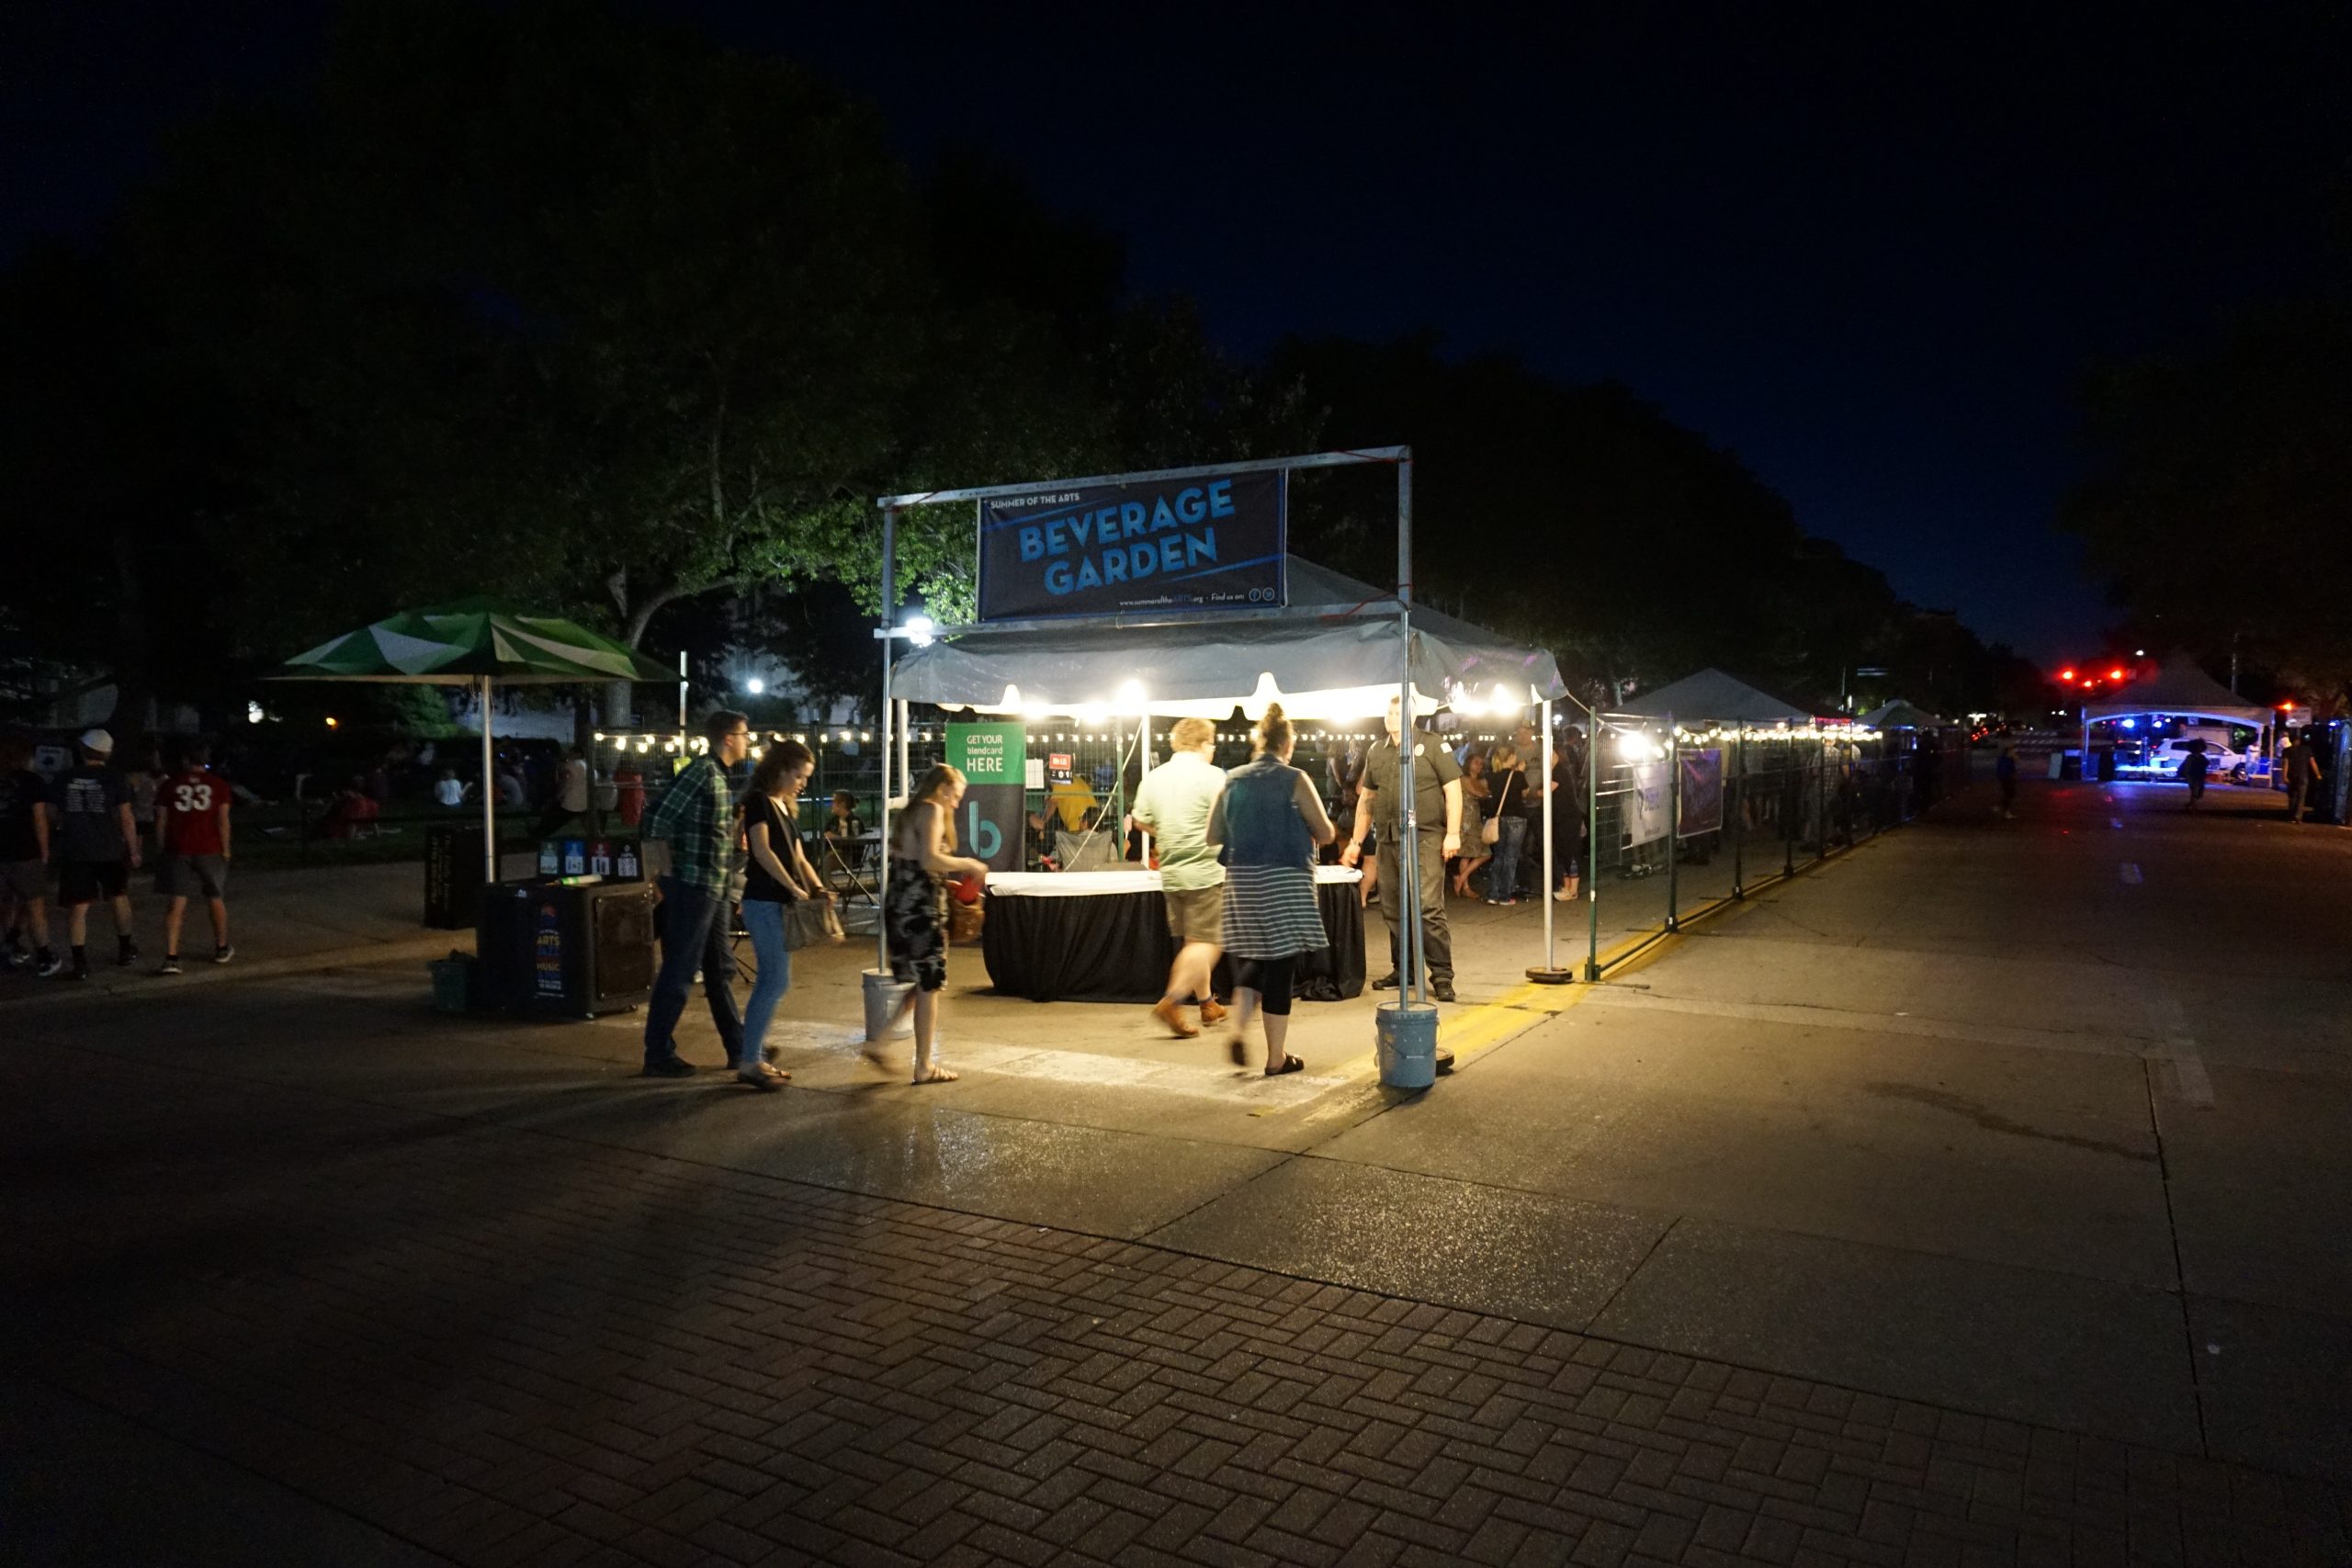 Entrance to the Beverage Garden at the Festival Setup for the 2017 Iowa City Jazz Festival